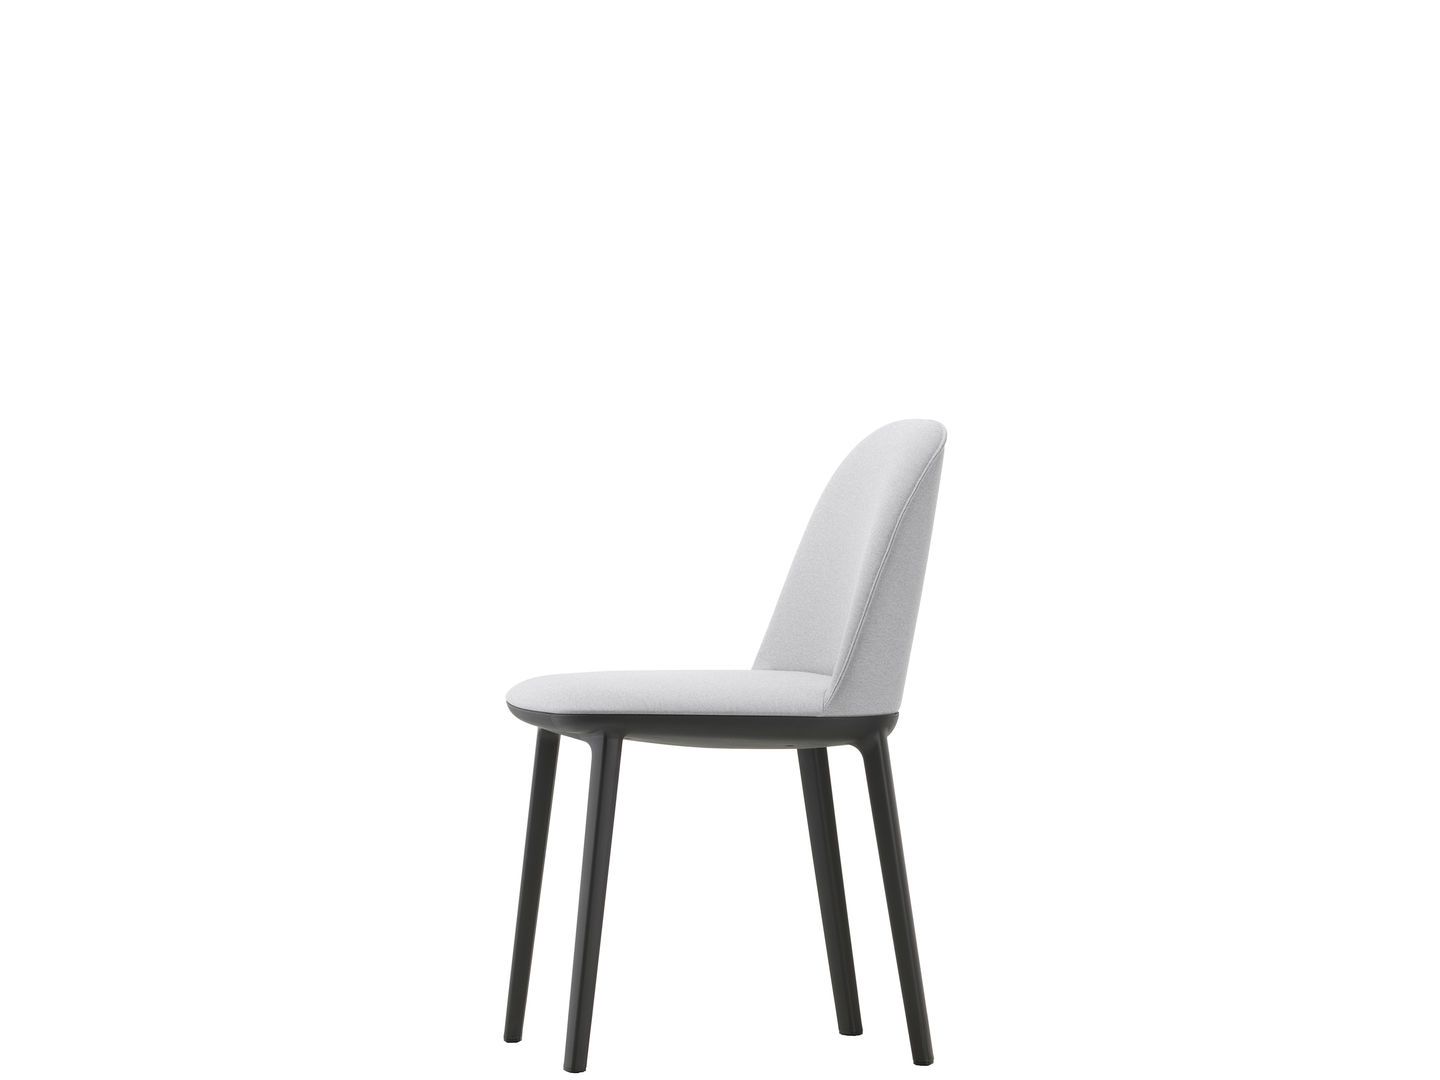 Softshell Side Chair | One52 Furniture 